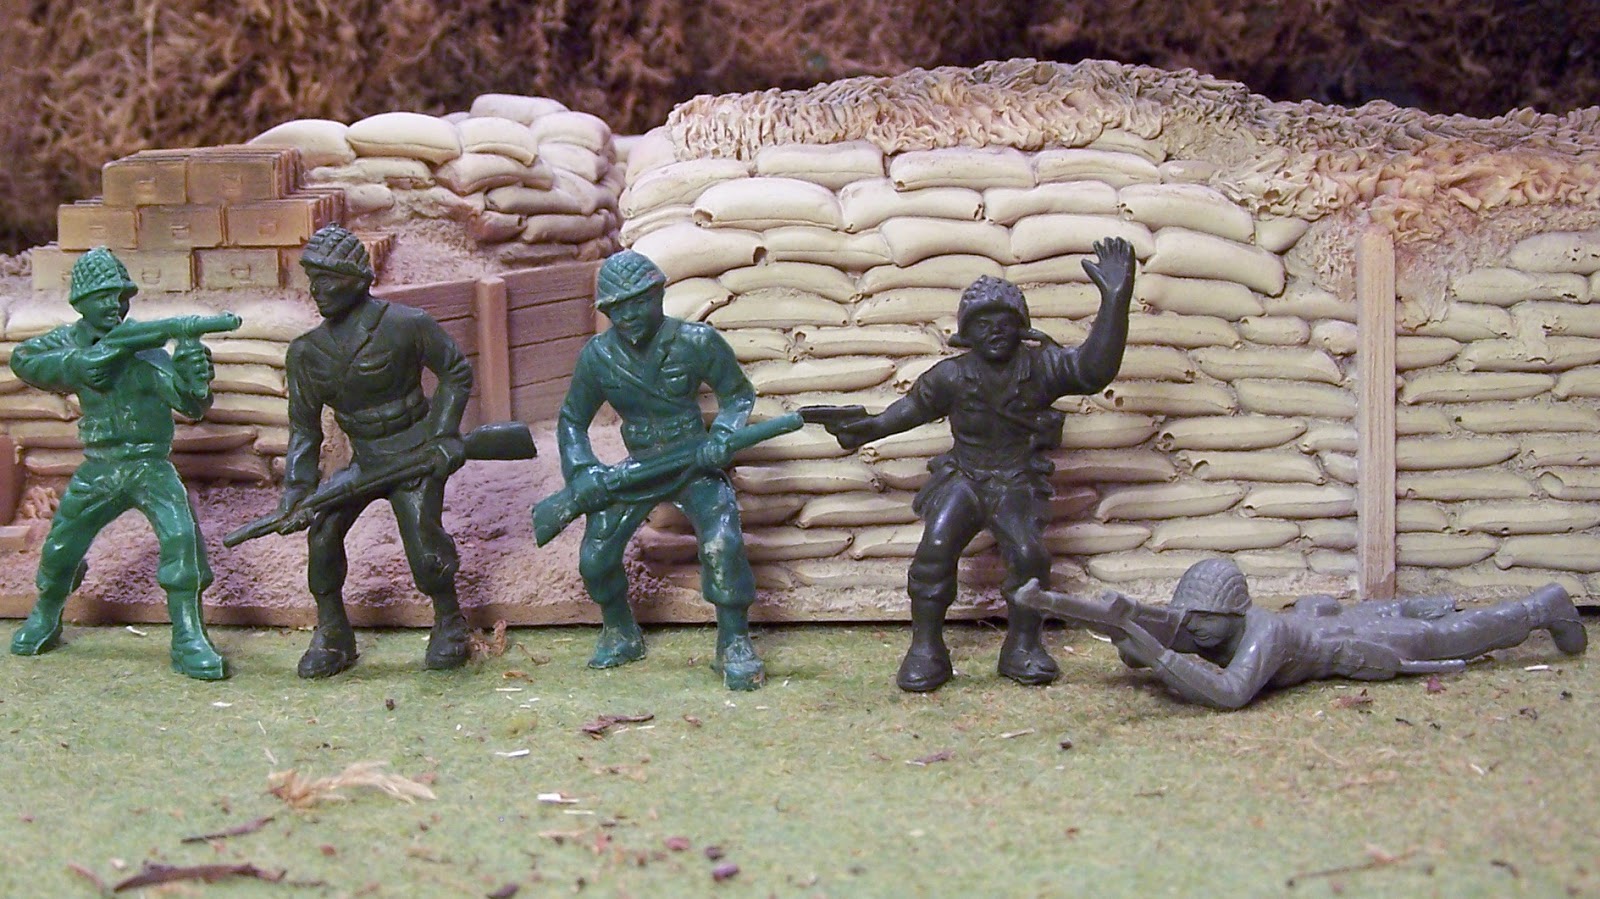 WWII Plastic Toy Soldiers: Lido - Toy Soldiers